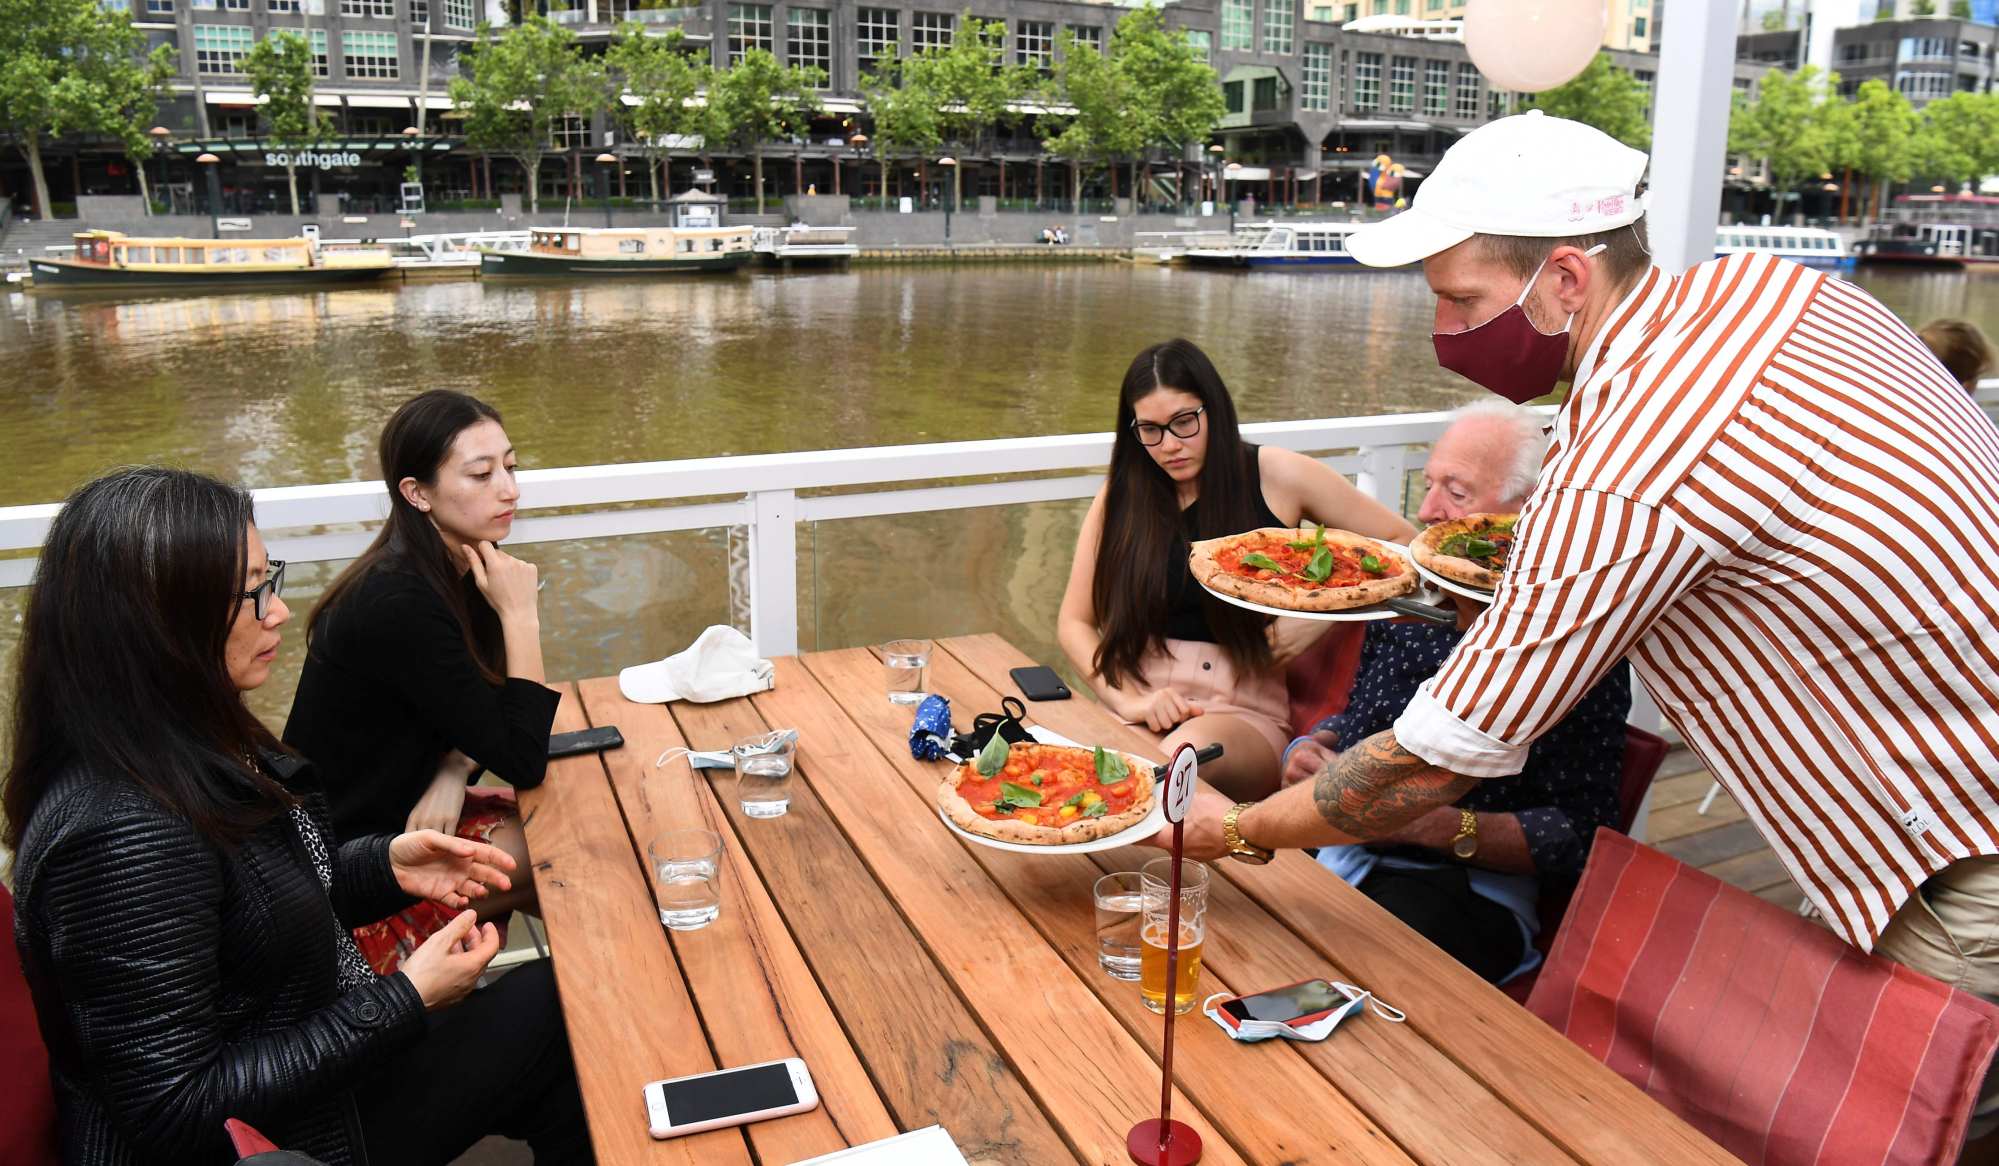 People have a meal at a cafe on Melbourne’s Yarra River. According to global booking service OpenTable, the number of seated diners in Australia dropped every month this year compared with last year. Photo: AFP